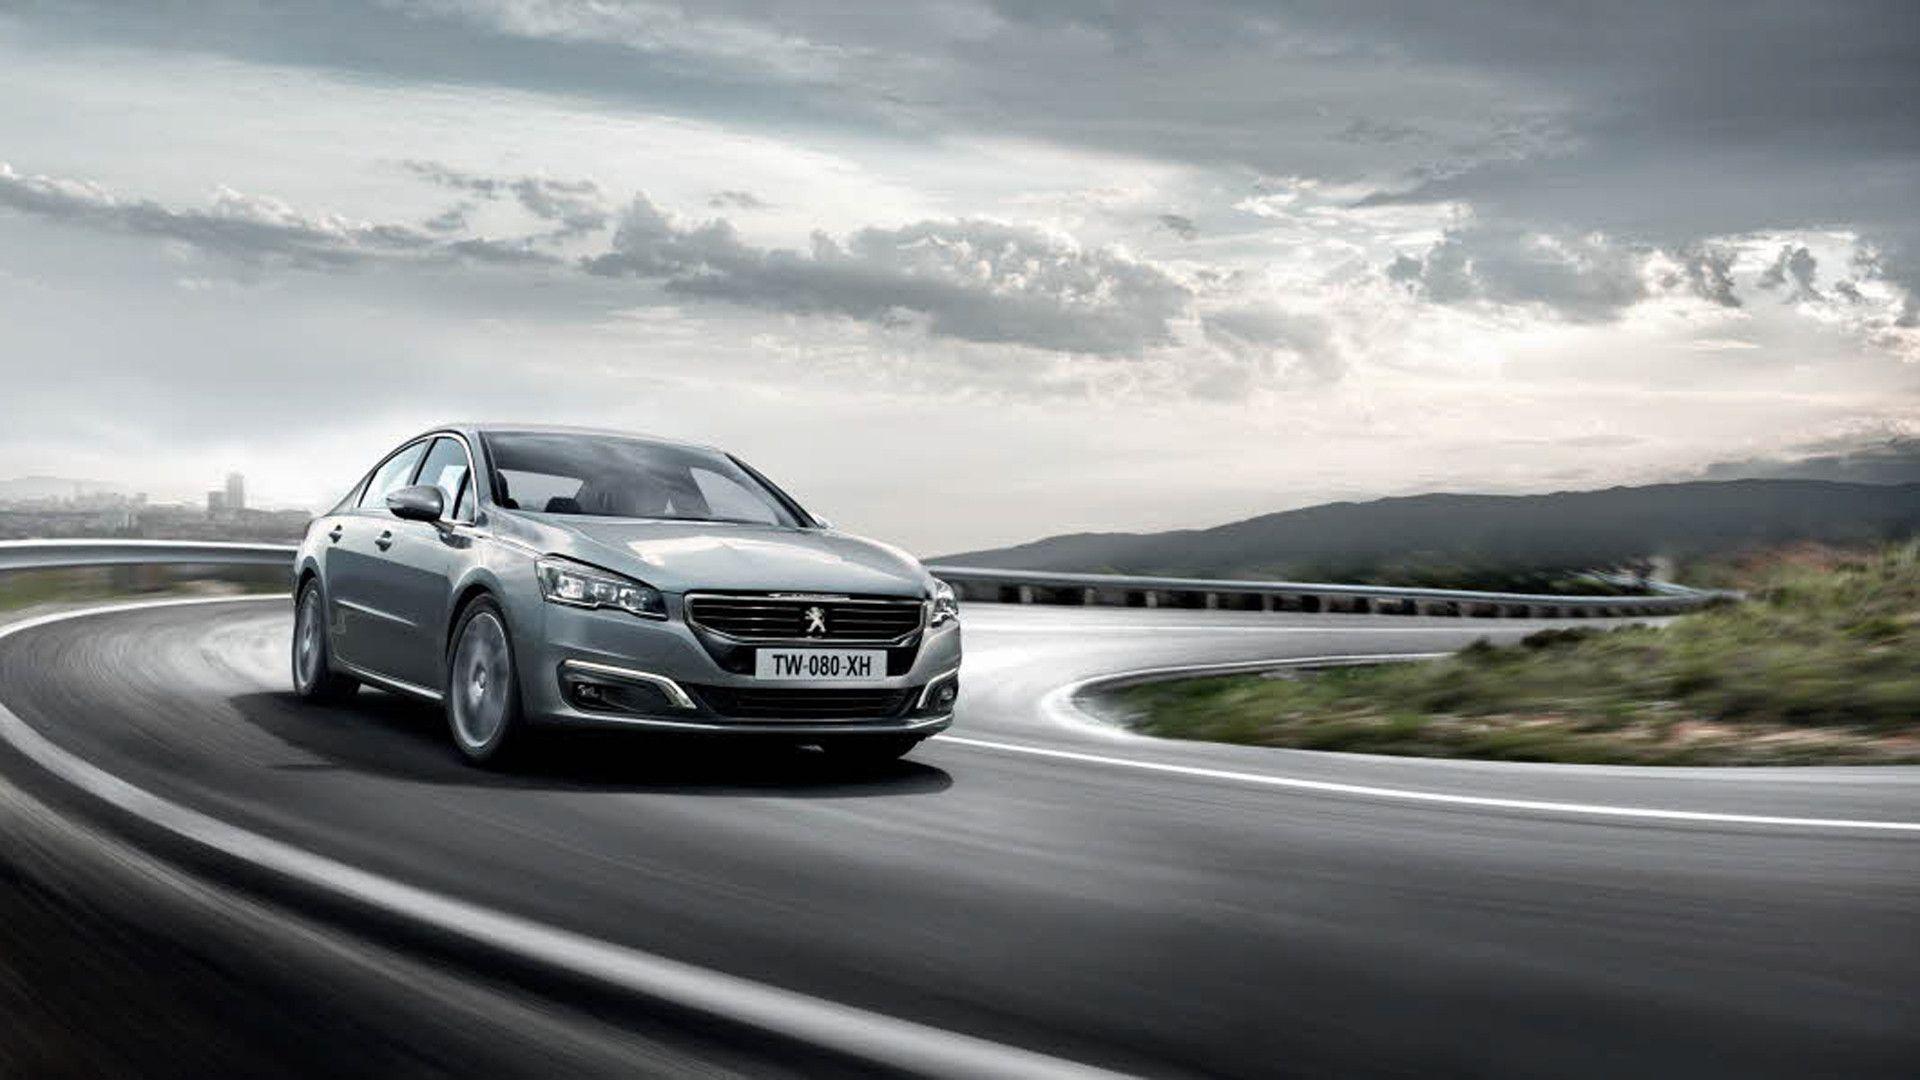 Gallery Peugeot 508. The comfortable family car dedicated to